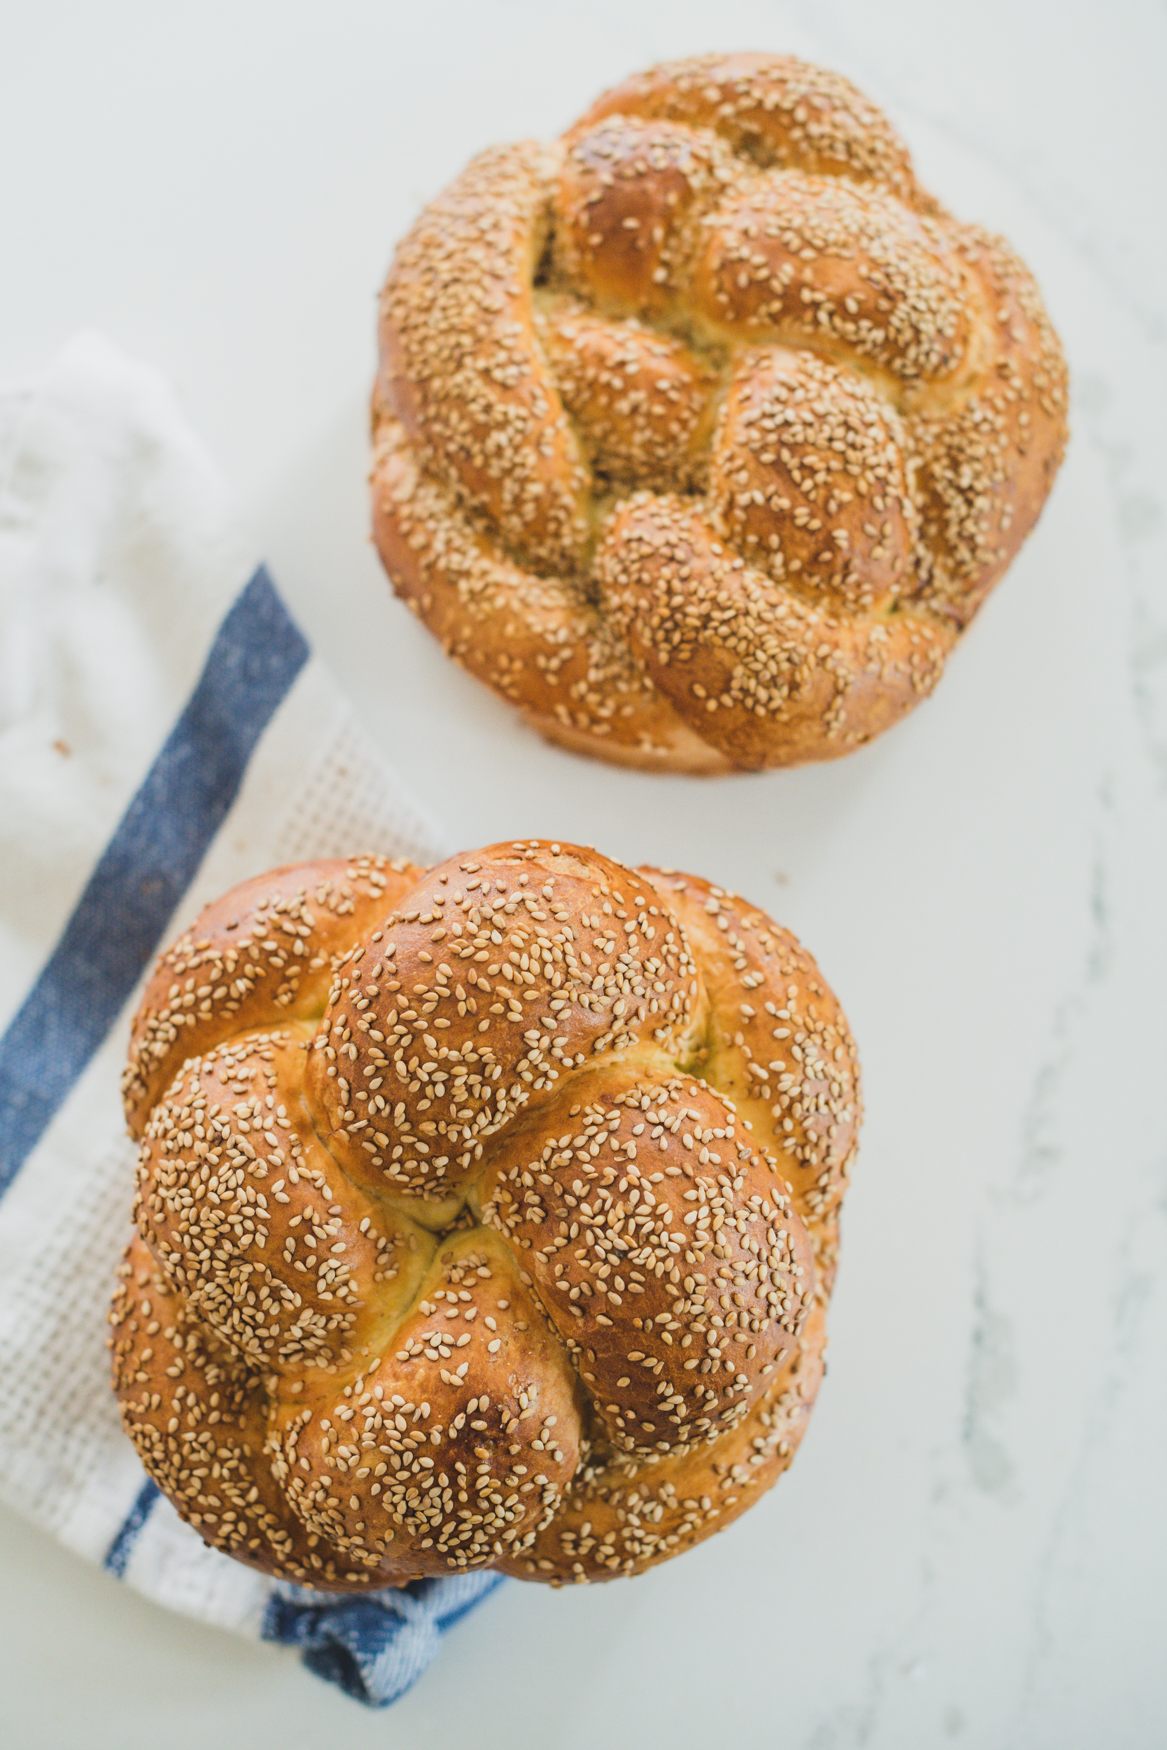 https://rolledindough.com/wp-content/uploads/2020/03/rolled-in-dough-airy-light-challah-13.jpg